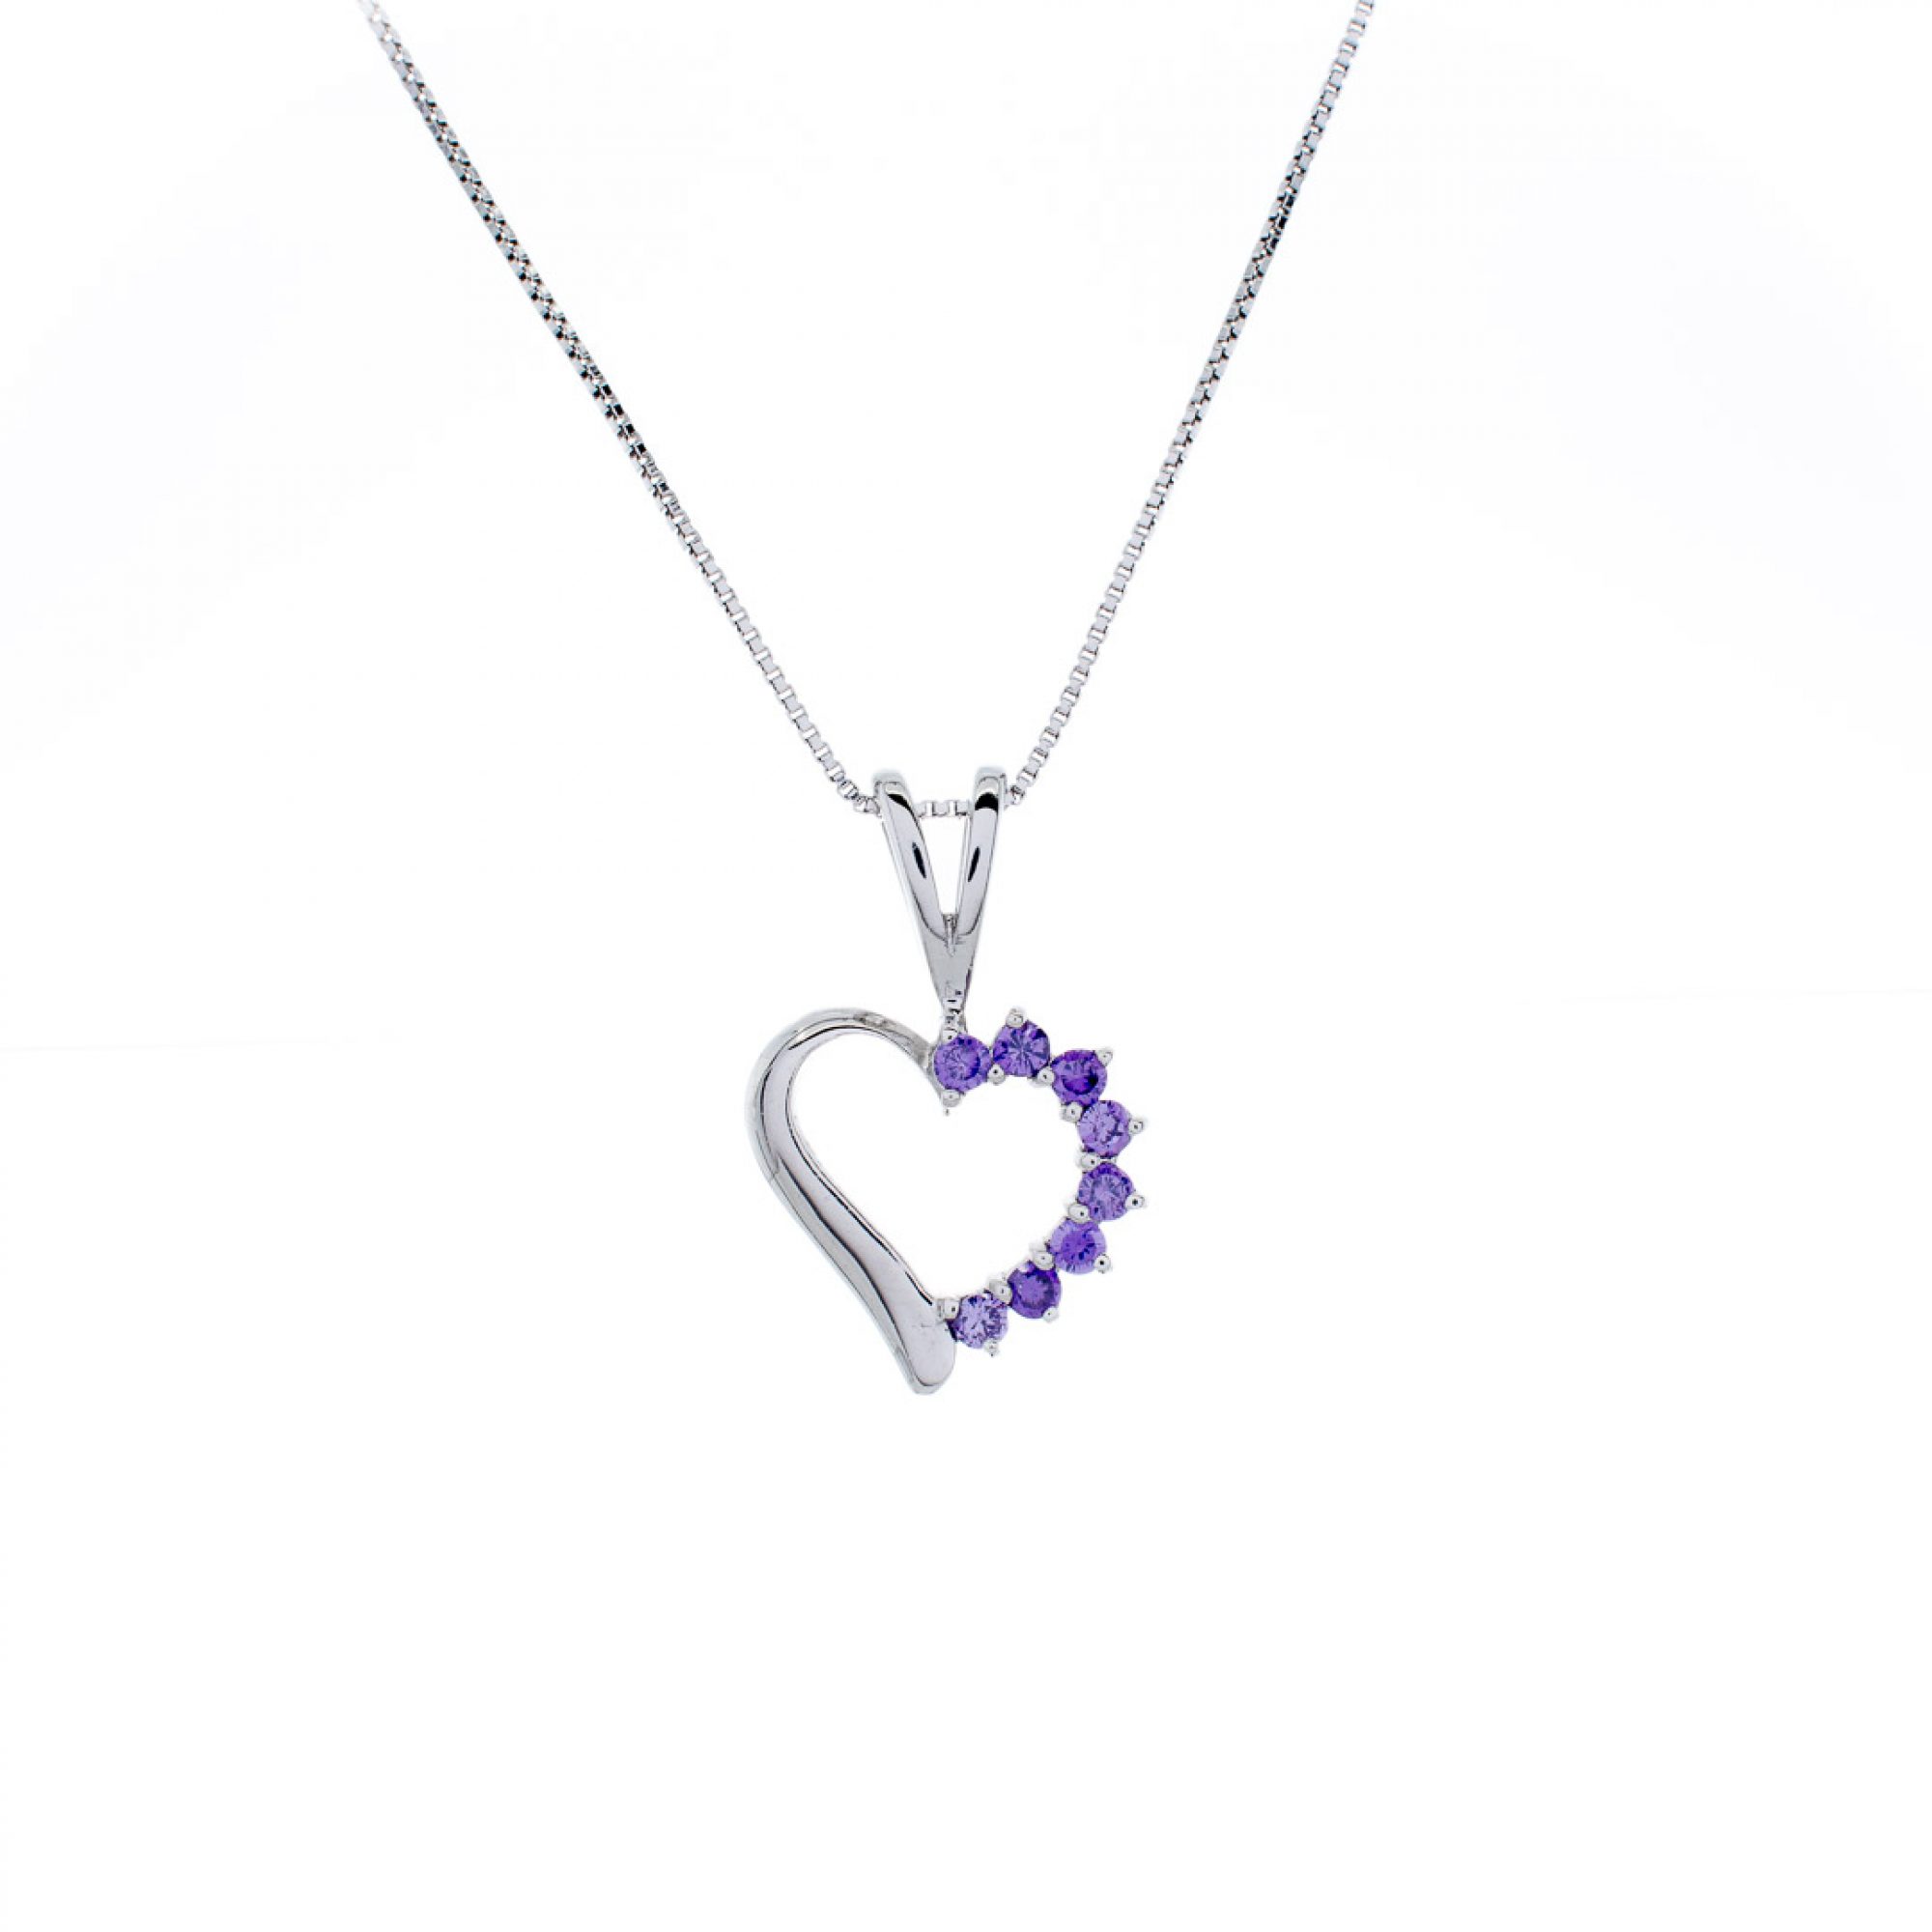 Heart necklace with amethyst stones